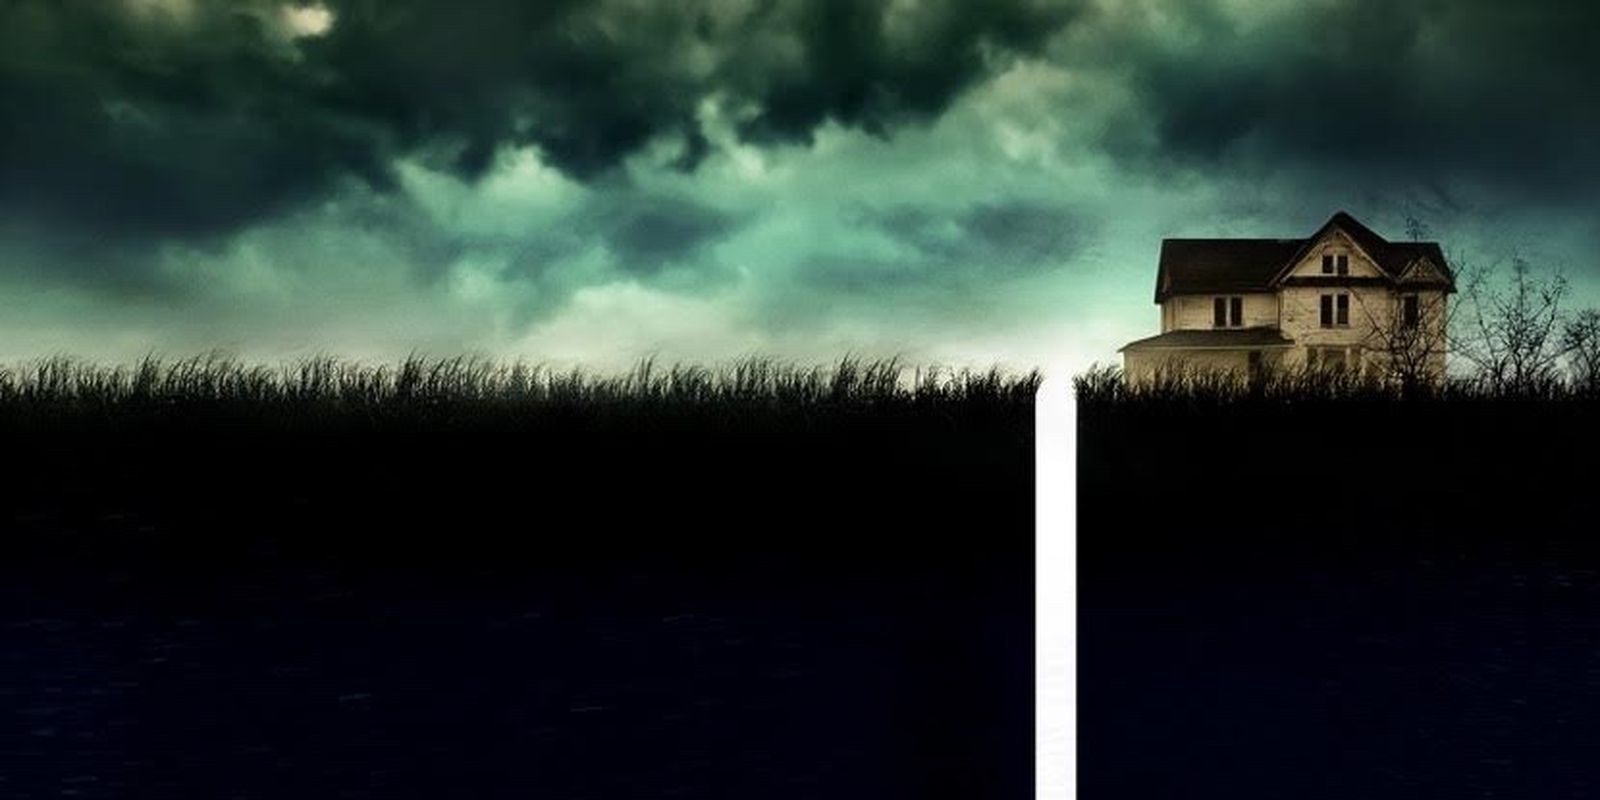 10 Cloverfield Lane: Project's Secrecy, Viral Marketing E-mail &amp; Products